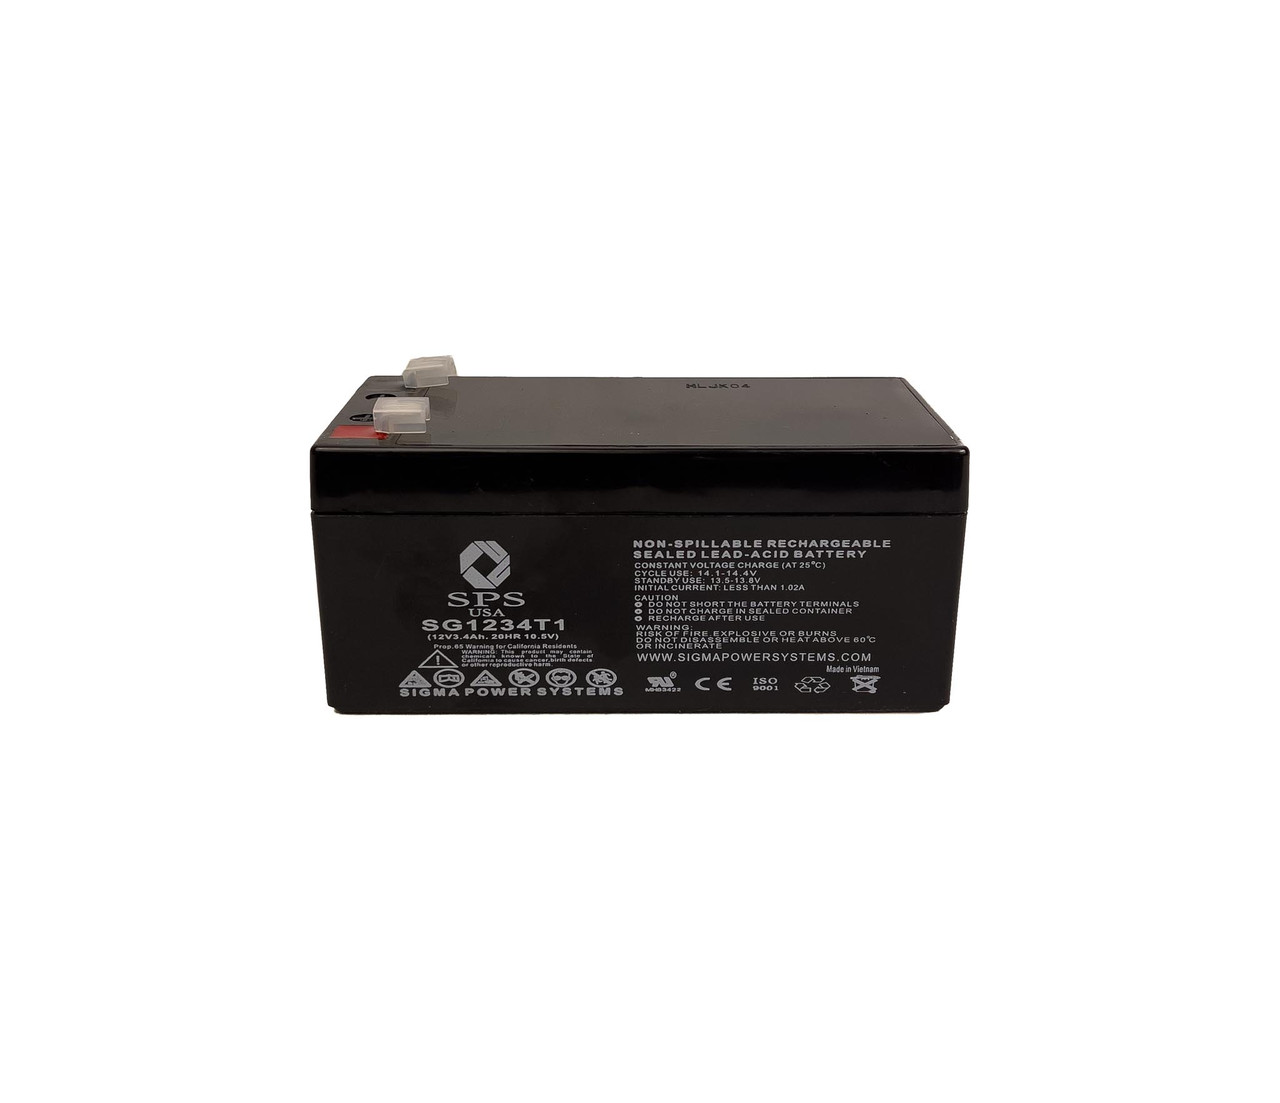 Black & Decker CST1000 Type 5 String Trimmer Replacement Battery